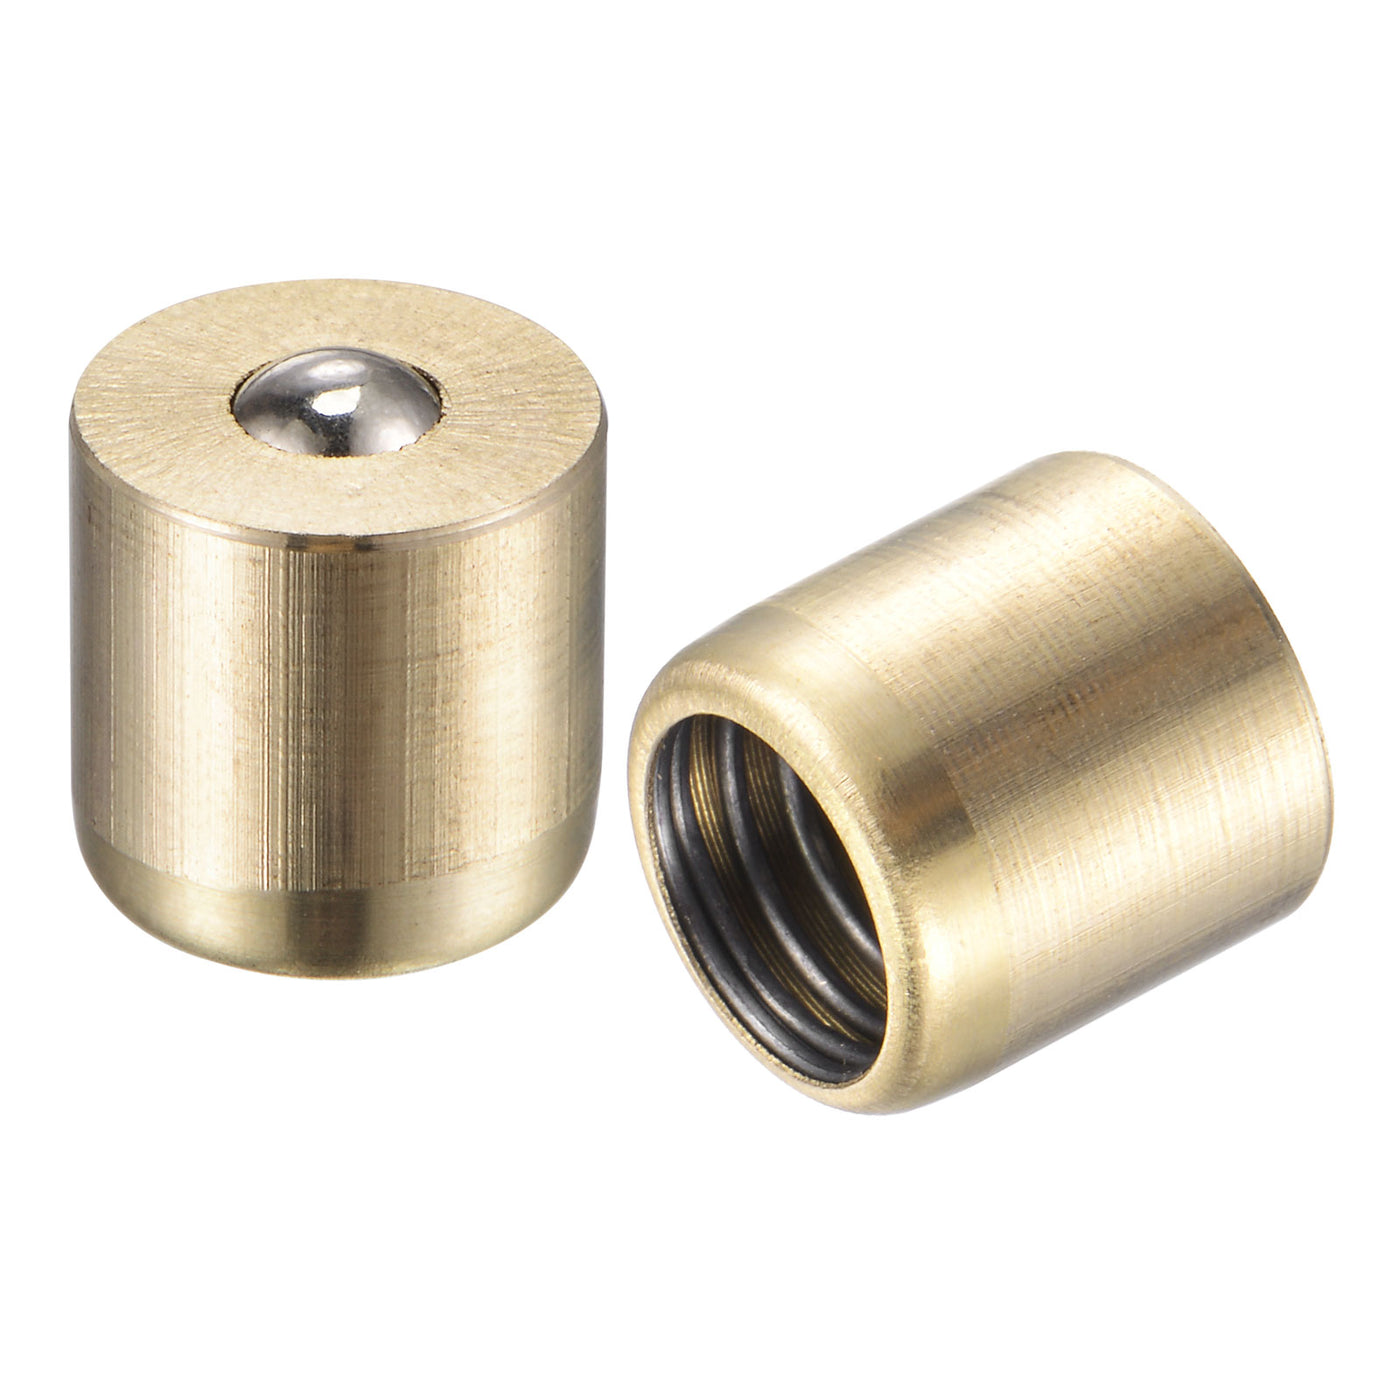 Uxcell Uxcell Brass Push Button Grease Oil Cup 8x8mm Ball Oiler for Lubrication System 20Pcs